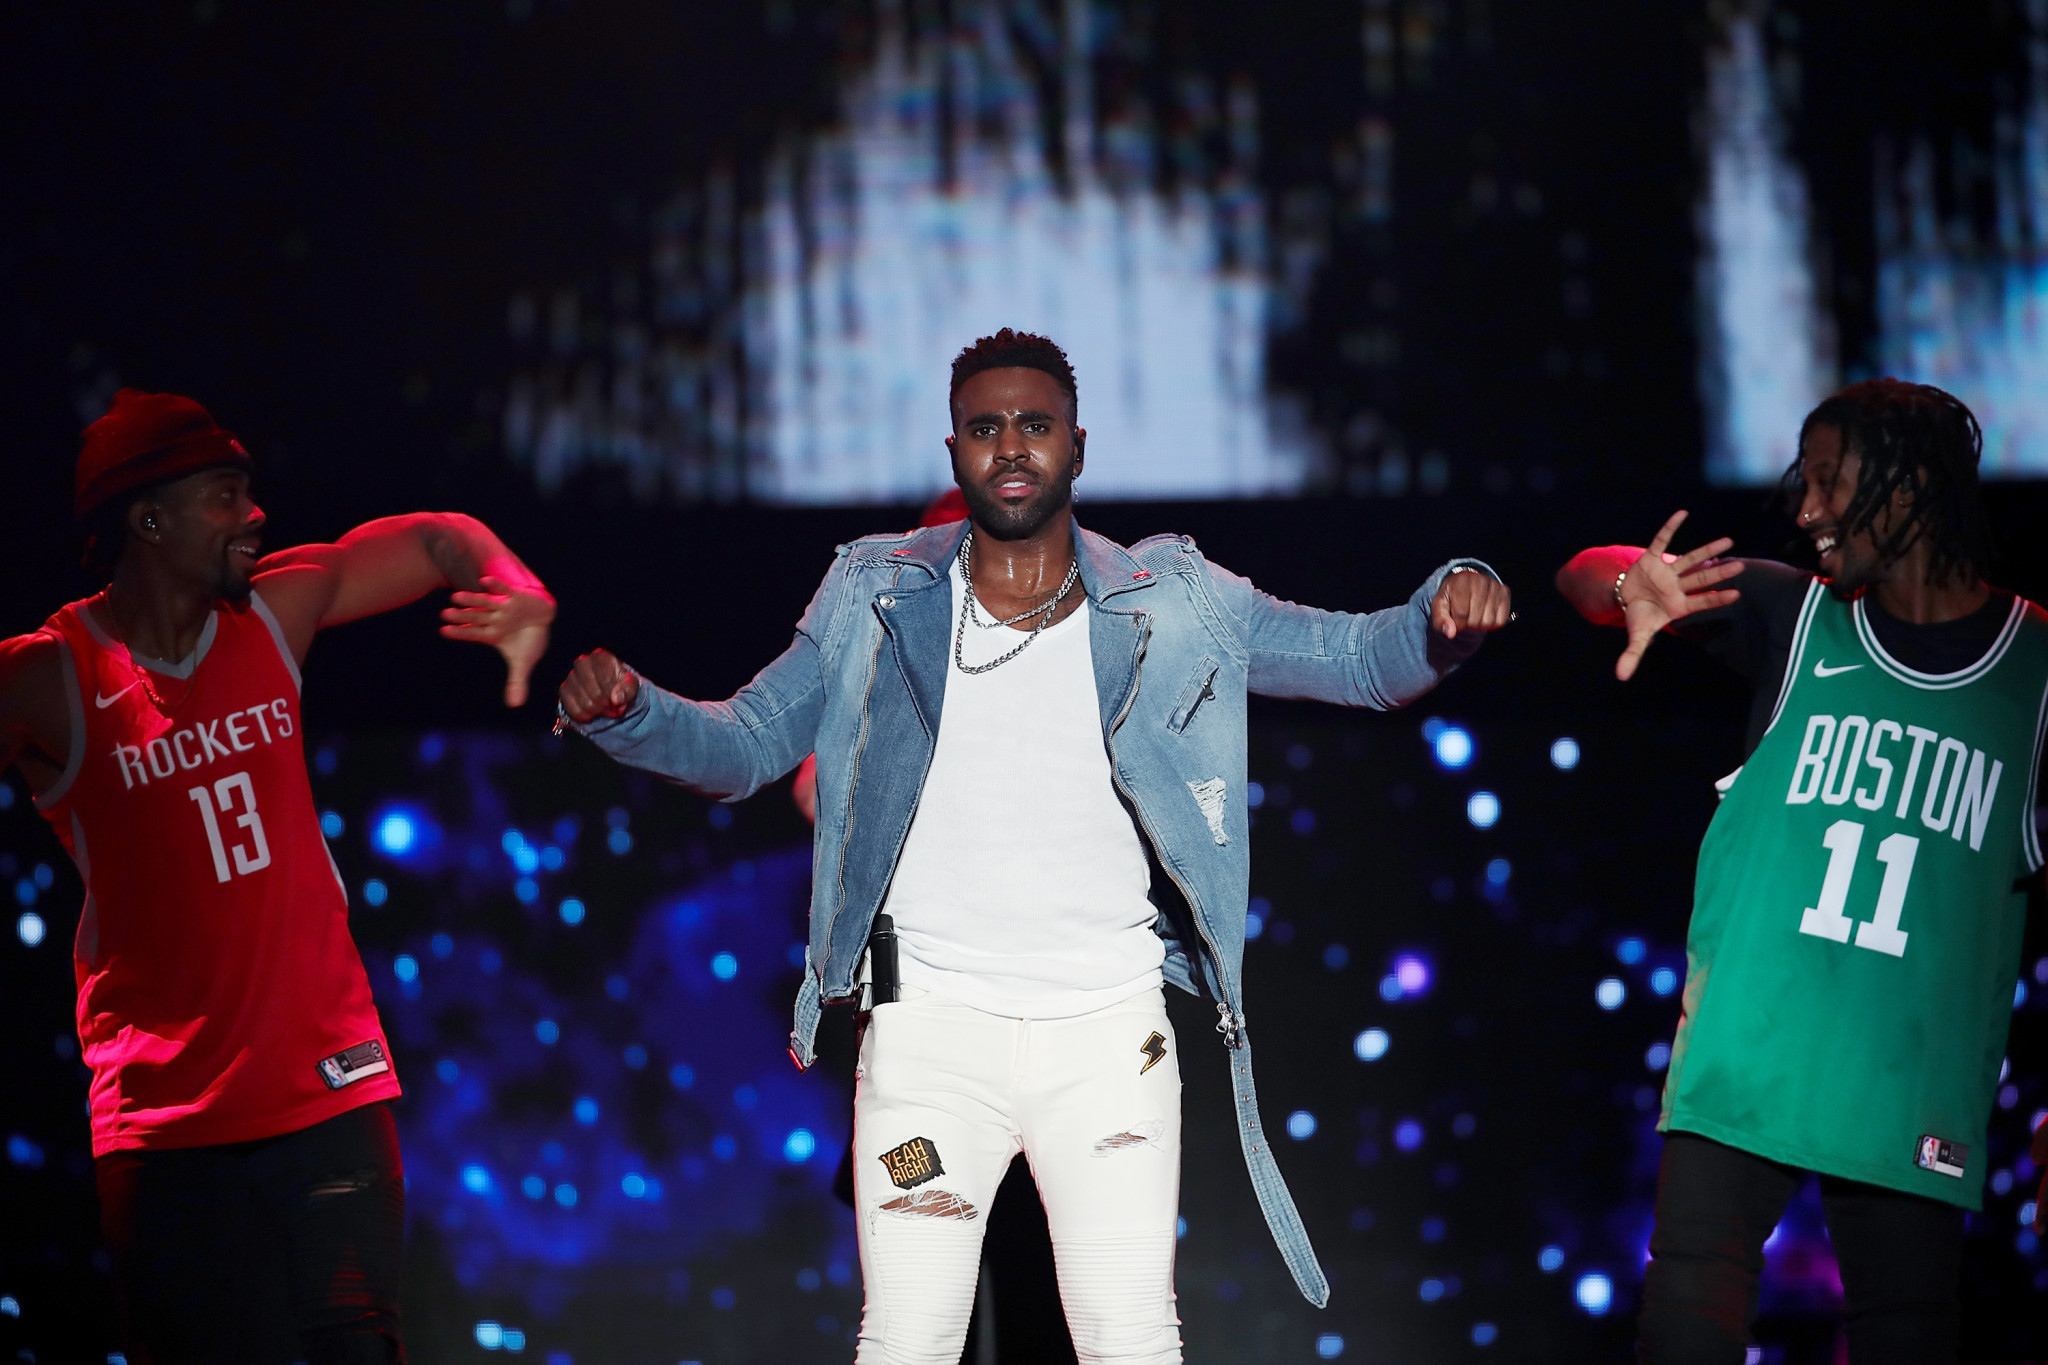 American singer songwriter Jason Derulo headlined the FIBA Basketball World Cup draw ©Getty Images